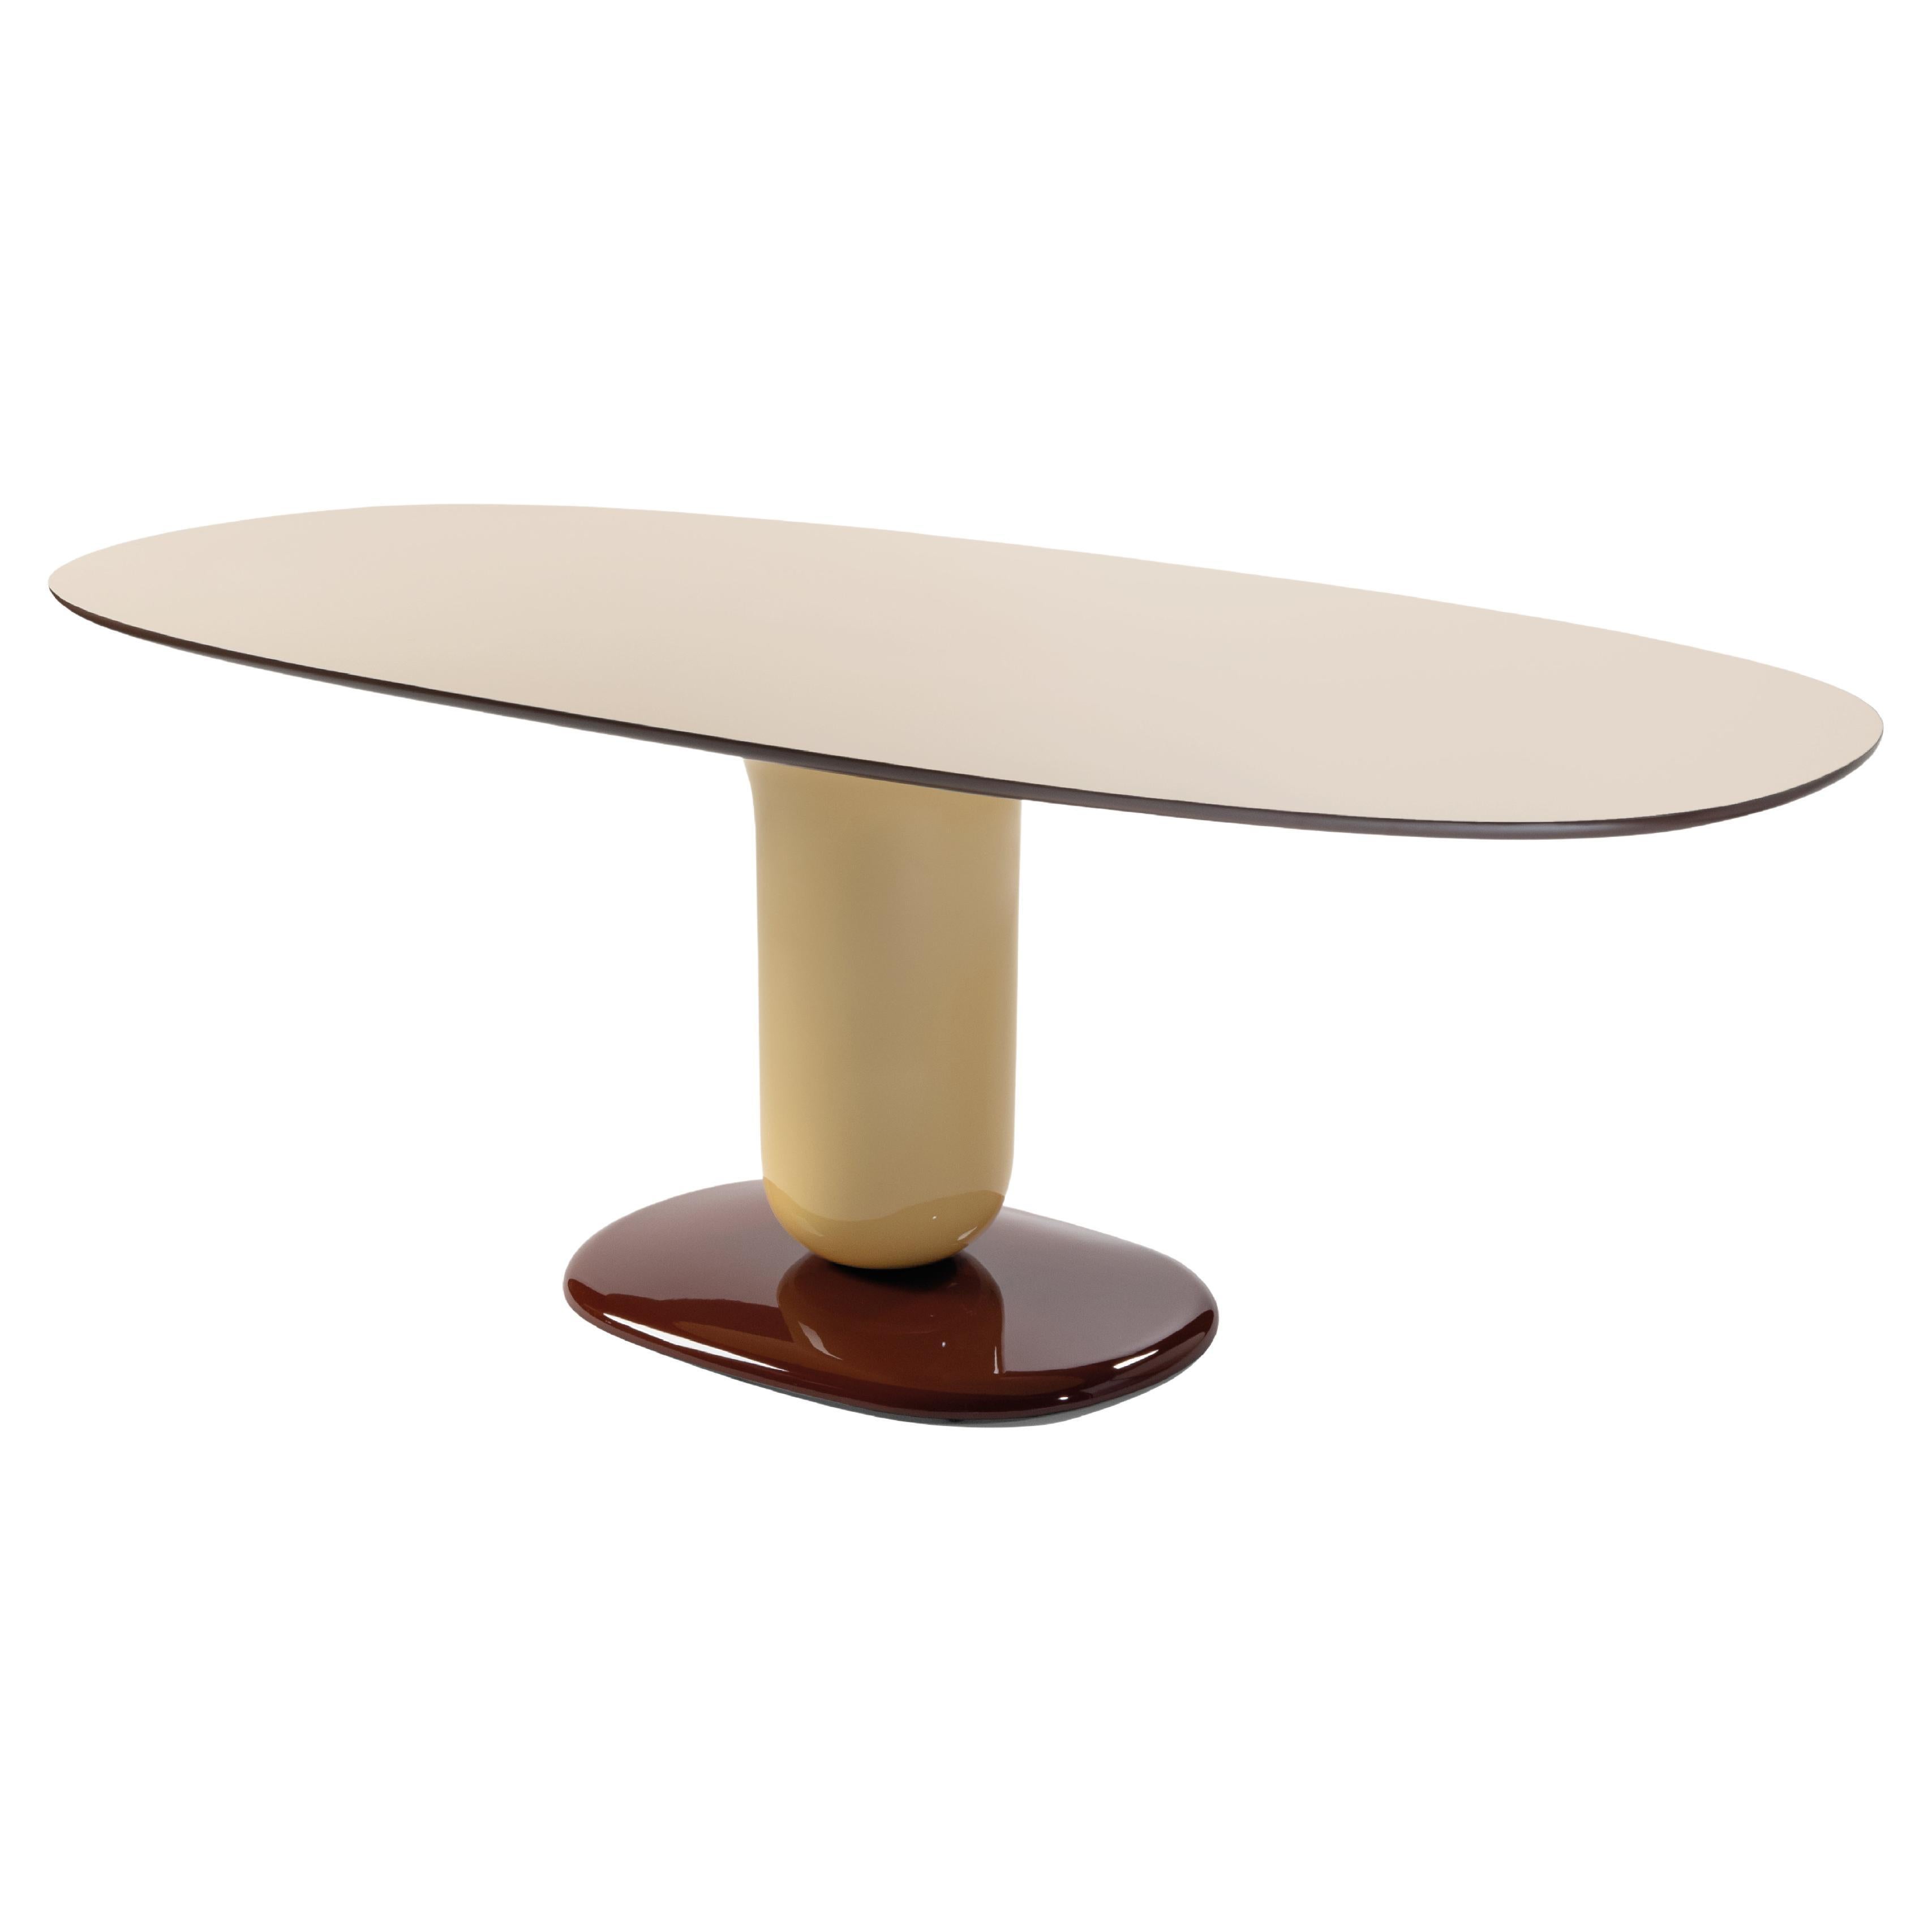 Contemporary Dining Table 'Explorer' by Jaime Hayon, 220 cm, Beige 